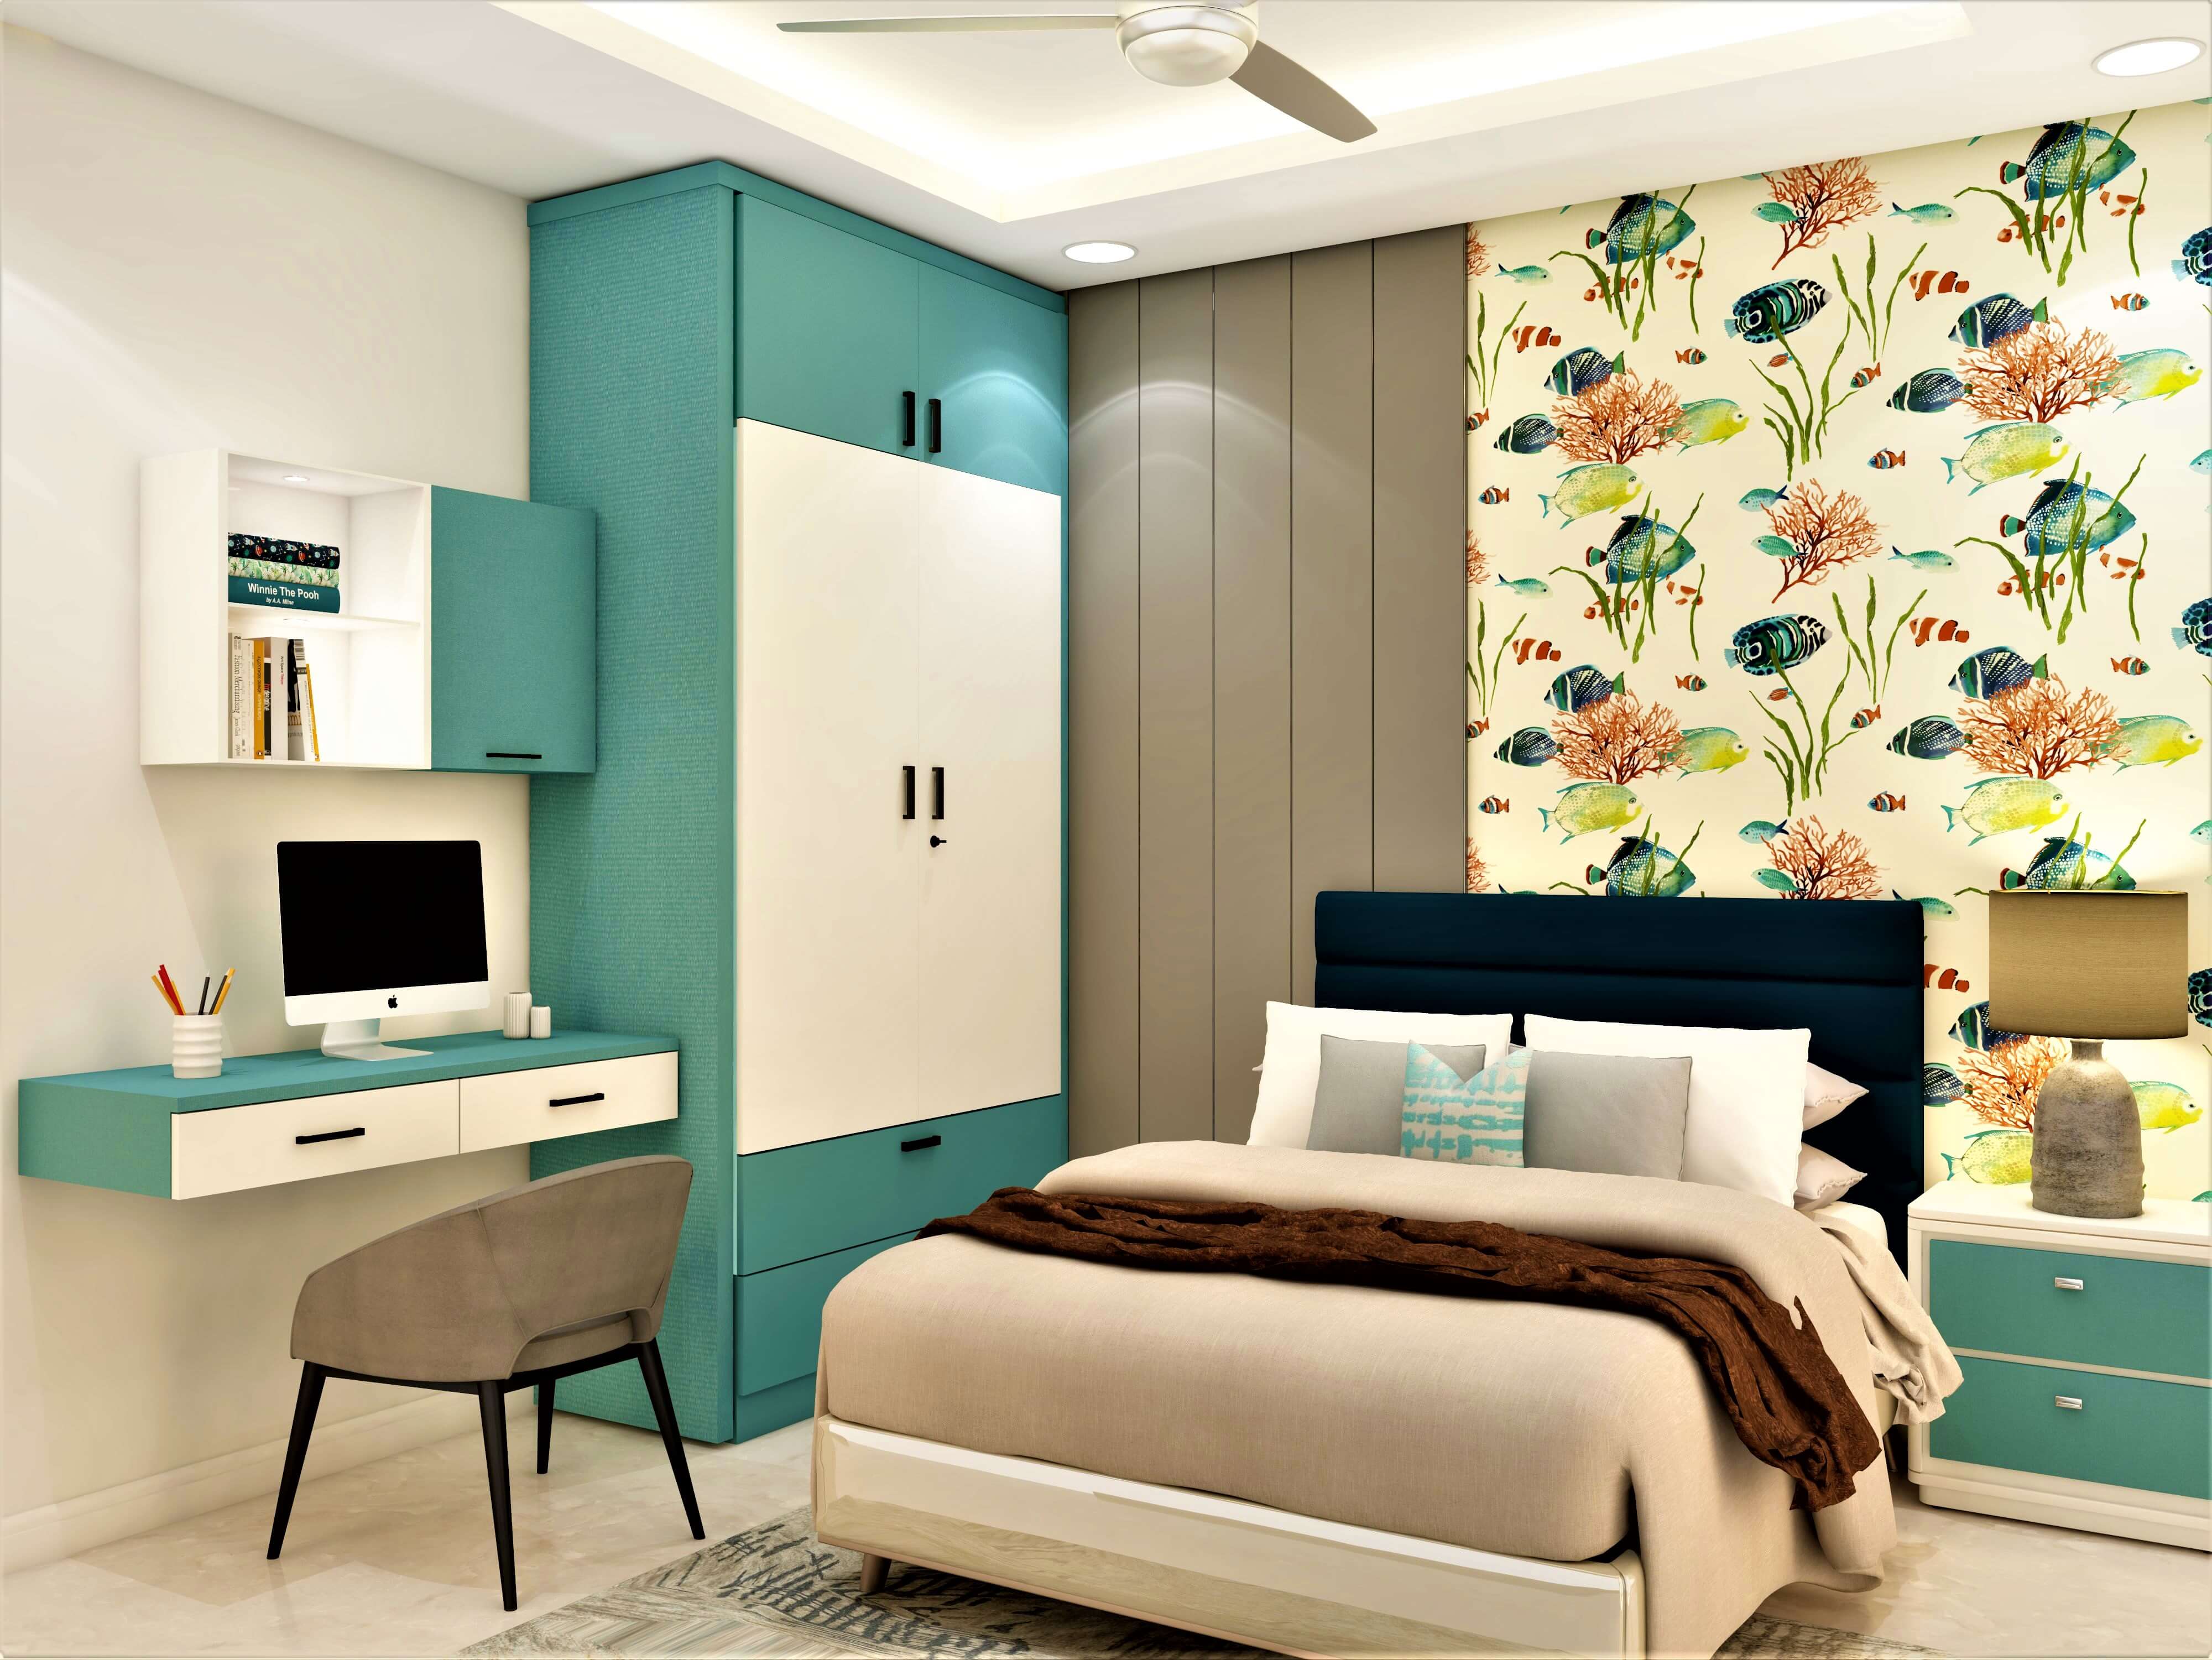 Contemporary kids bedroom design with a wallpaper - Beautiful Homes